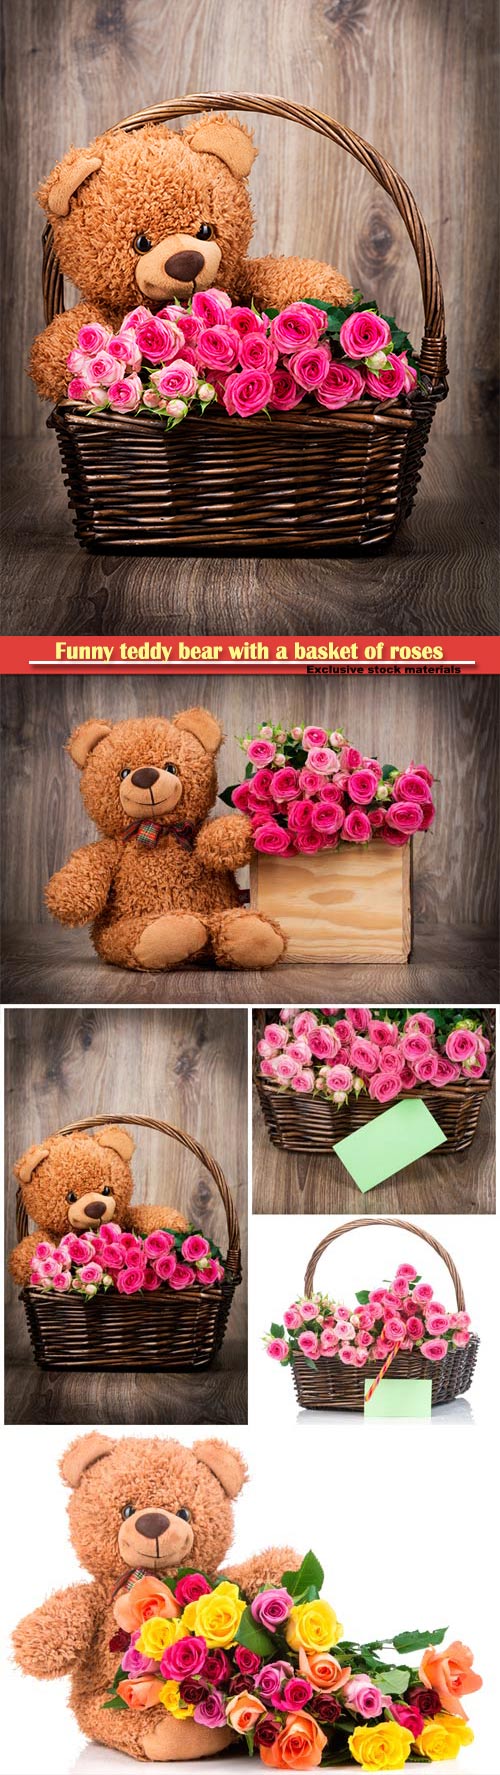 Funny teddy bear with a basket of roses